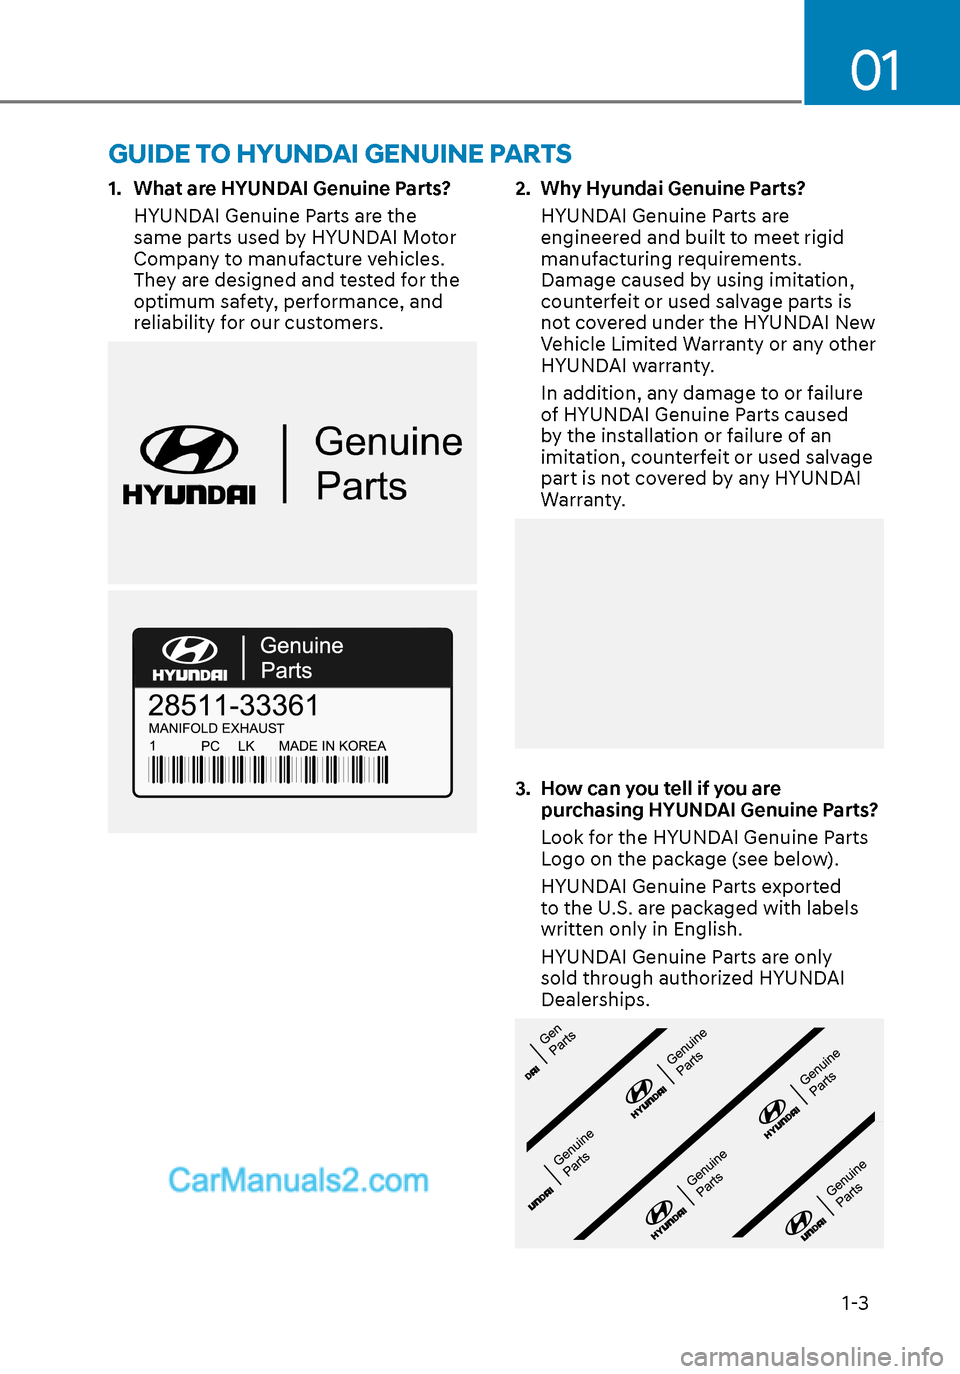 Hyundai Sonata 2020  Owners Manual 01
1-3
1. What are HYUNDAI Genuine Parts?
HYUNDAI Genuine Parts are the 
same parts used by HYUNDAI Motor 
Company to manufacture vehicles. 
They are designed and tested for the 
optimum safety, perfo